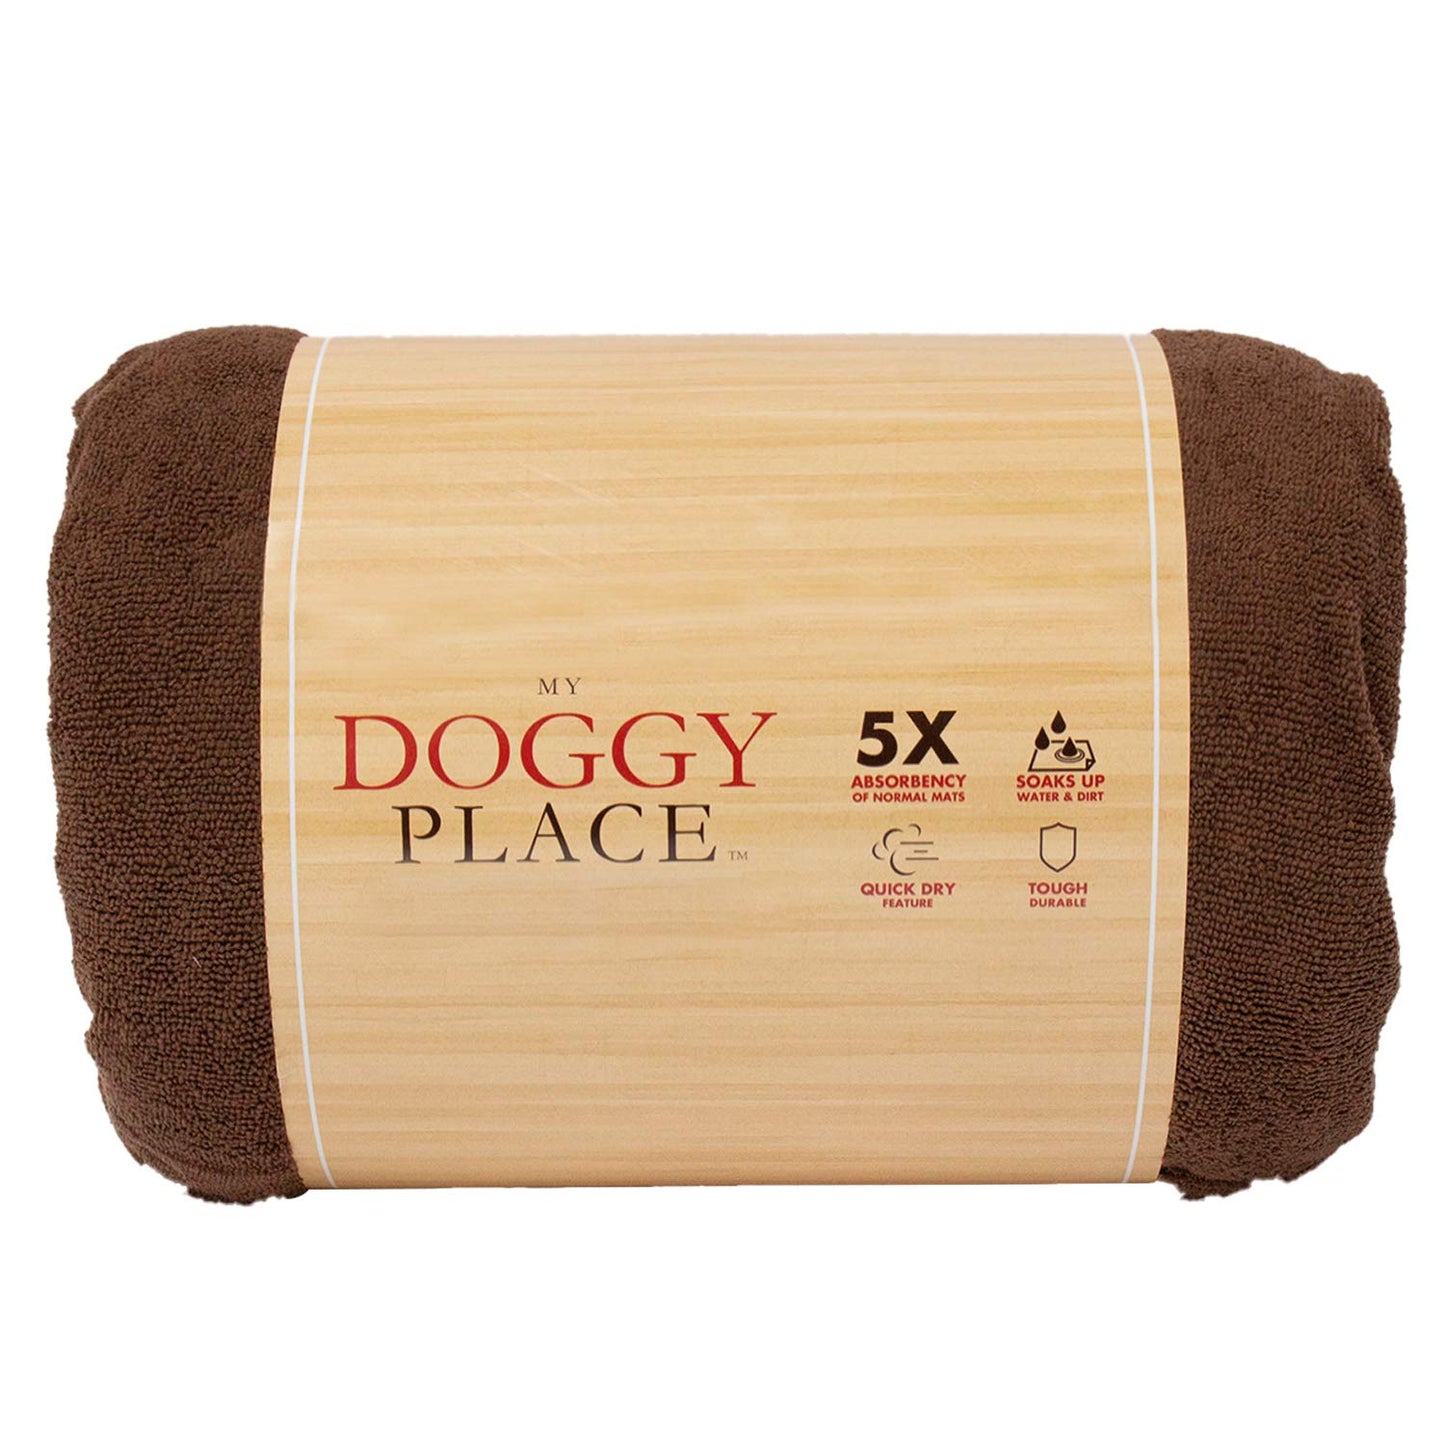 Microfiber Padded Crate Cover for Dogs - Multi-Size and Color Options